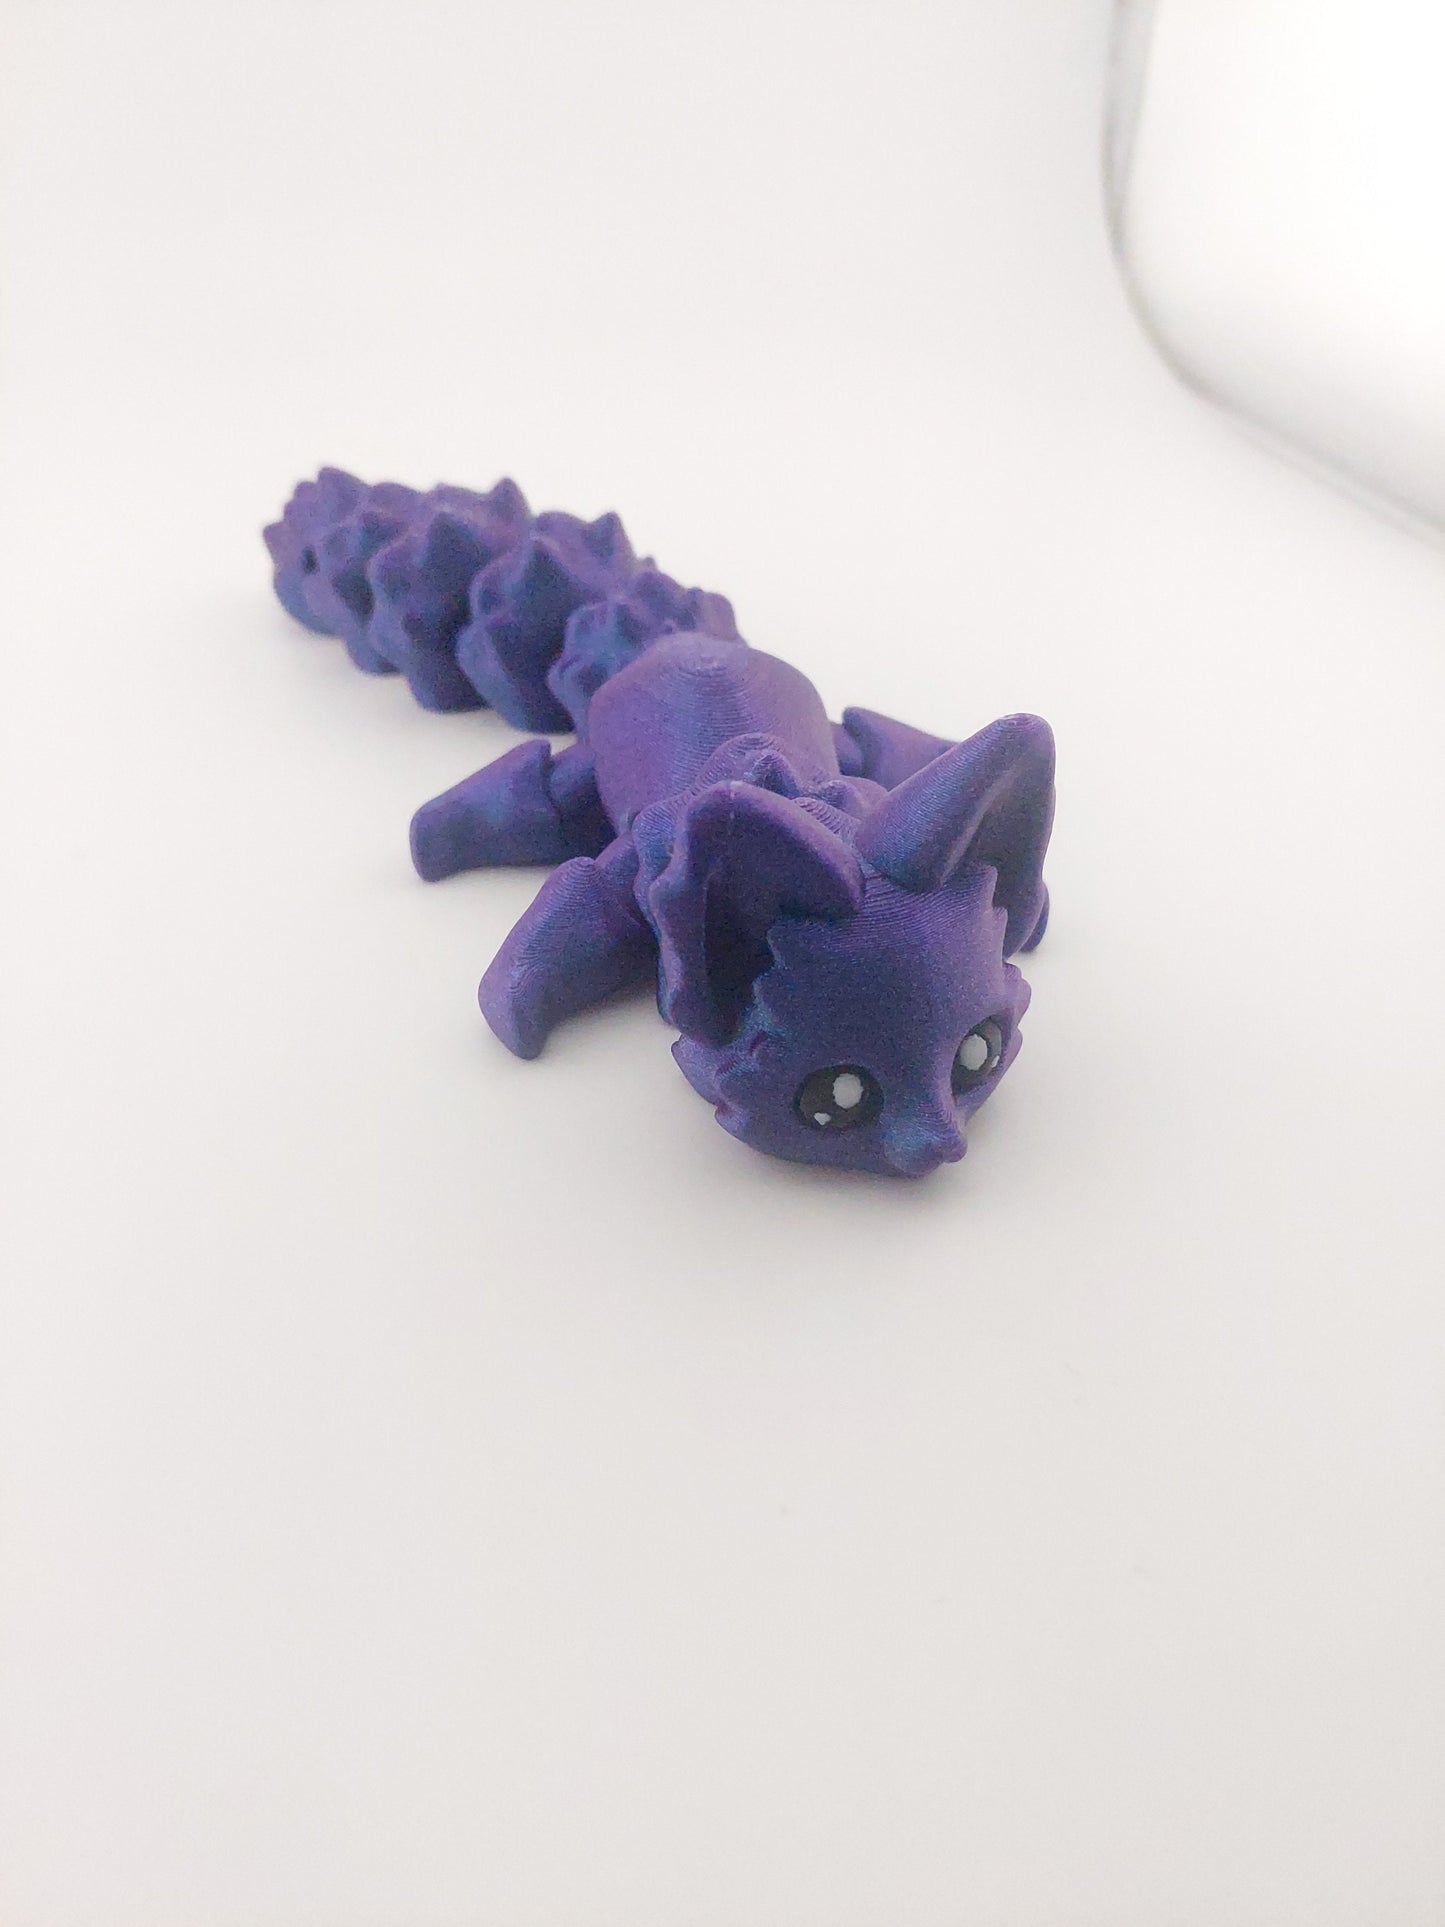 Articulated Cute Nebula Purple Flexi Fox 7.5 Inches - 3D Printed Fidget Fantasy - Authorized Seller - Articulated Desk Buddy